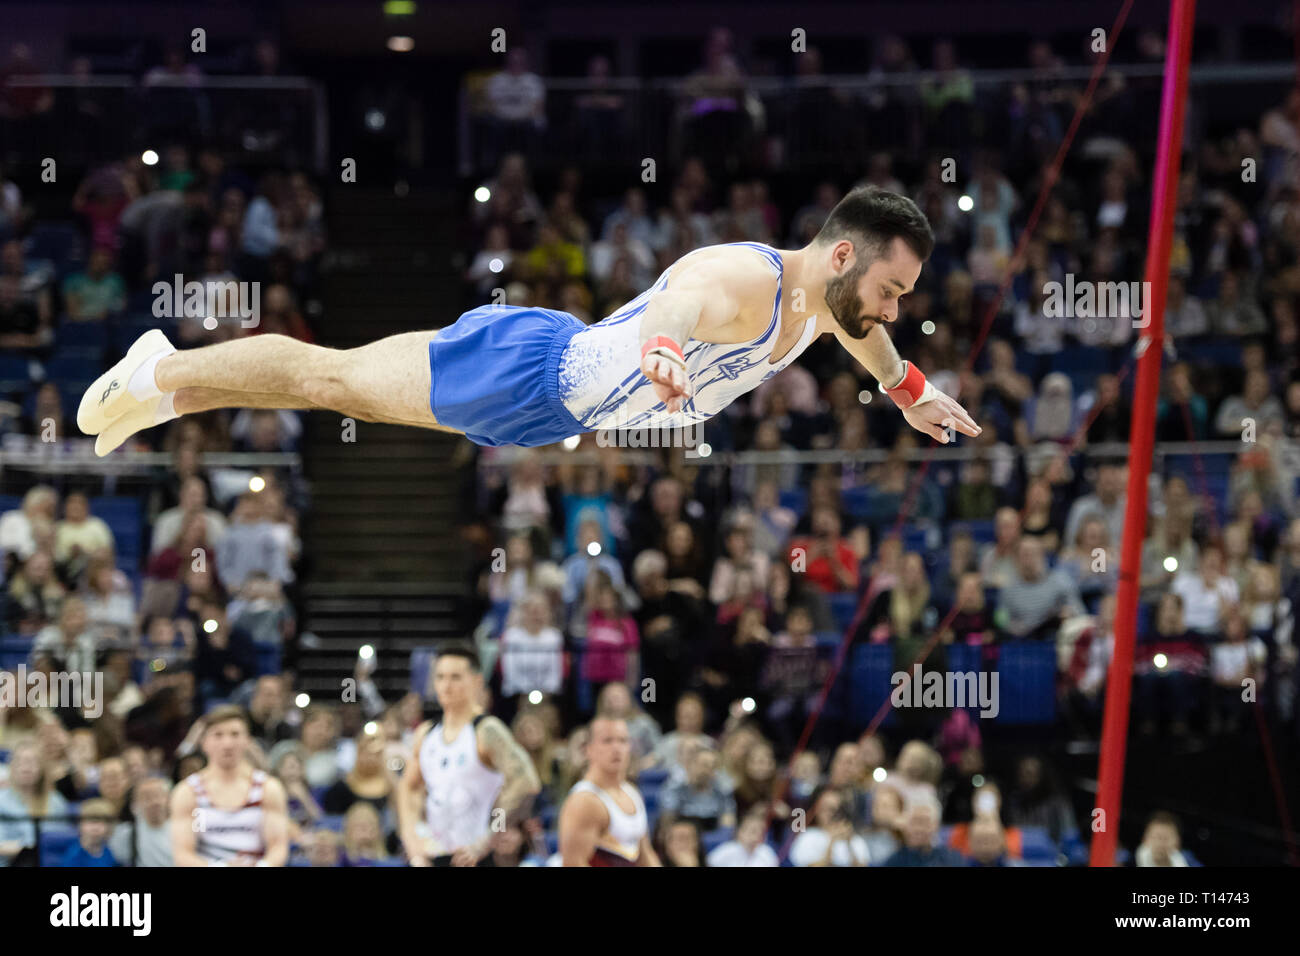 London, UK. 23rd March, 2019. James Hall performs Floor Exercise during the Matchroom Multisport presents the 2019 Superstars of Gymnastics at The O2 Arena on Saturday, 23 March 2019. LONDON ENGLAND. Credit: Taka G Wu/Alamy News Stock Photo